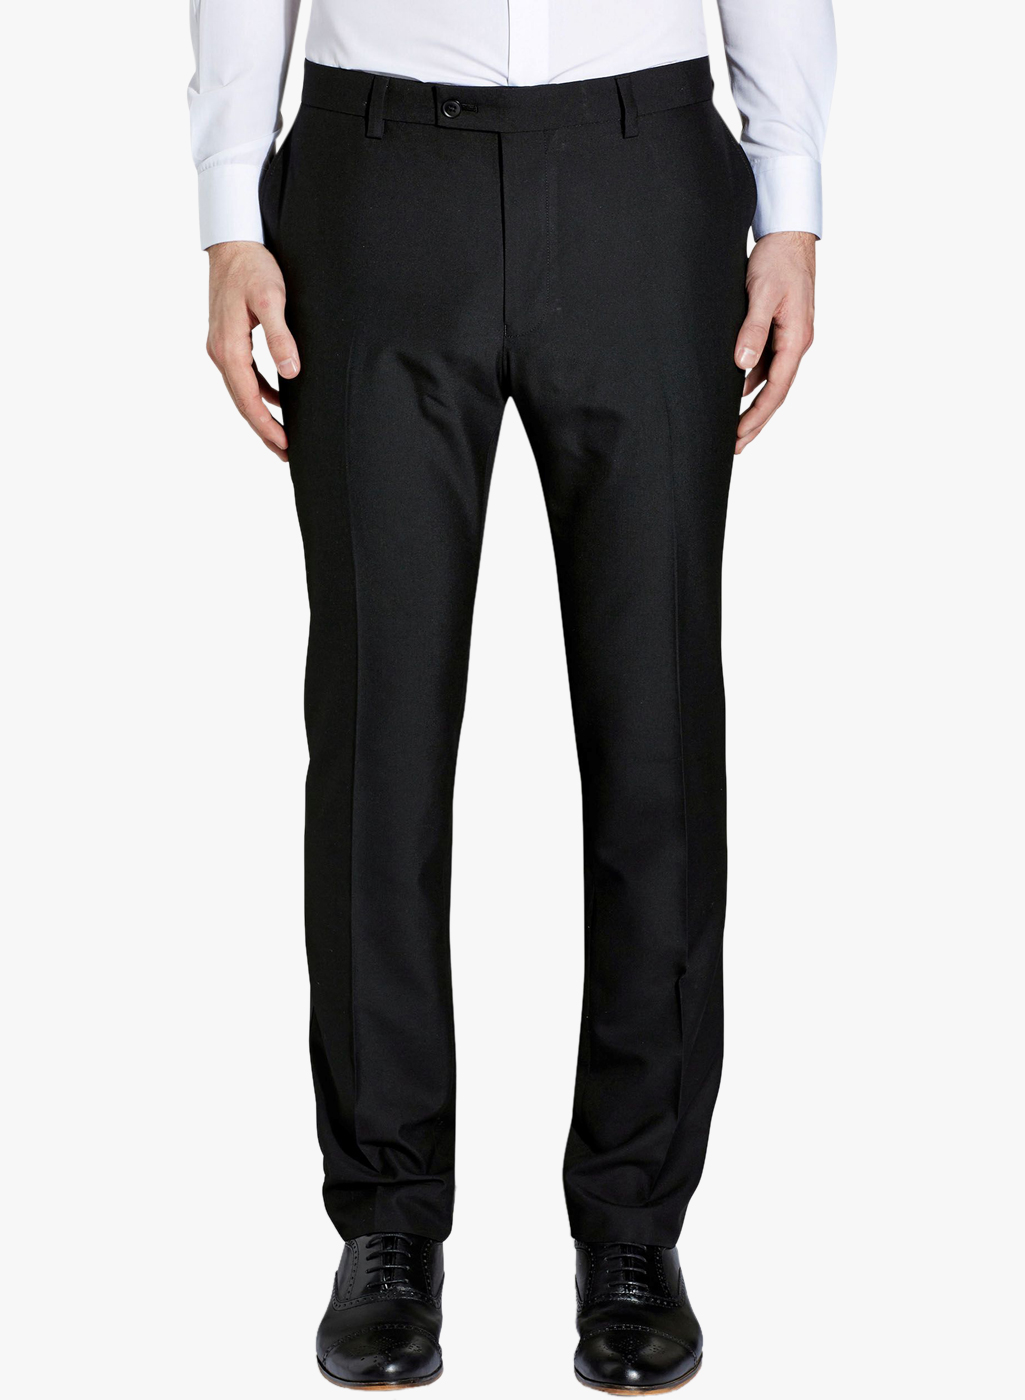 Denims & Trousers Black Men Trouser Pants, Size: 28 To 36 Size, Lycra at Rs  310 in Surat